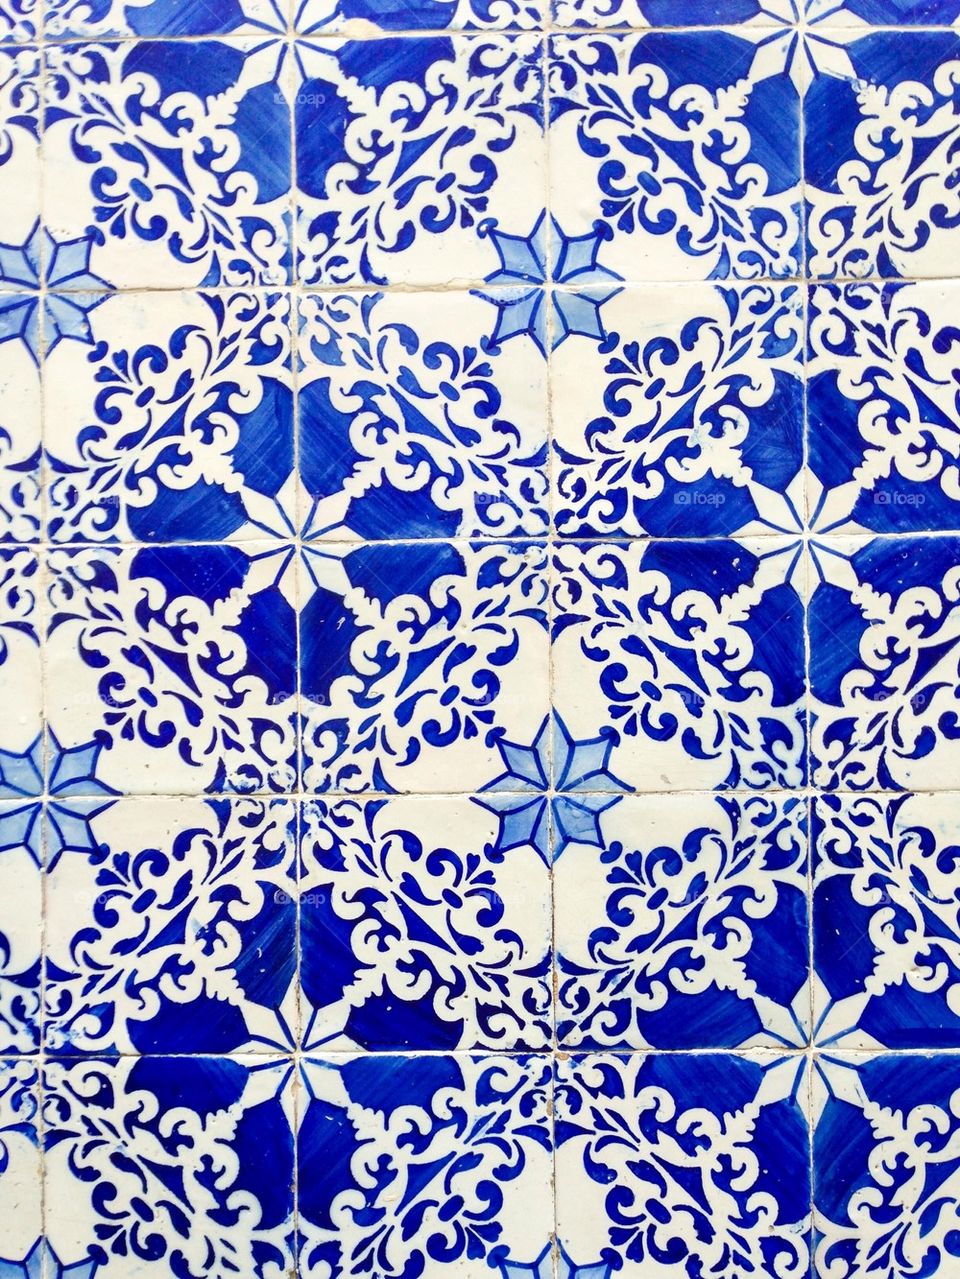 Blue and white Portuguese tiles 